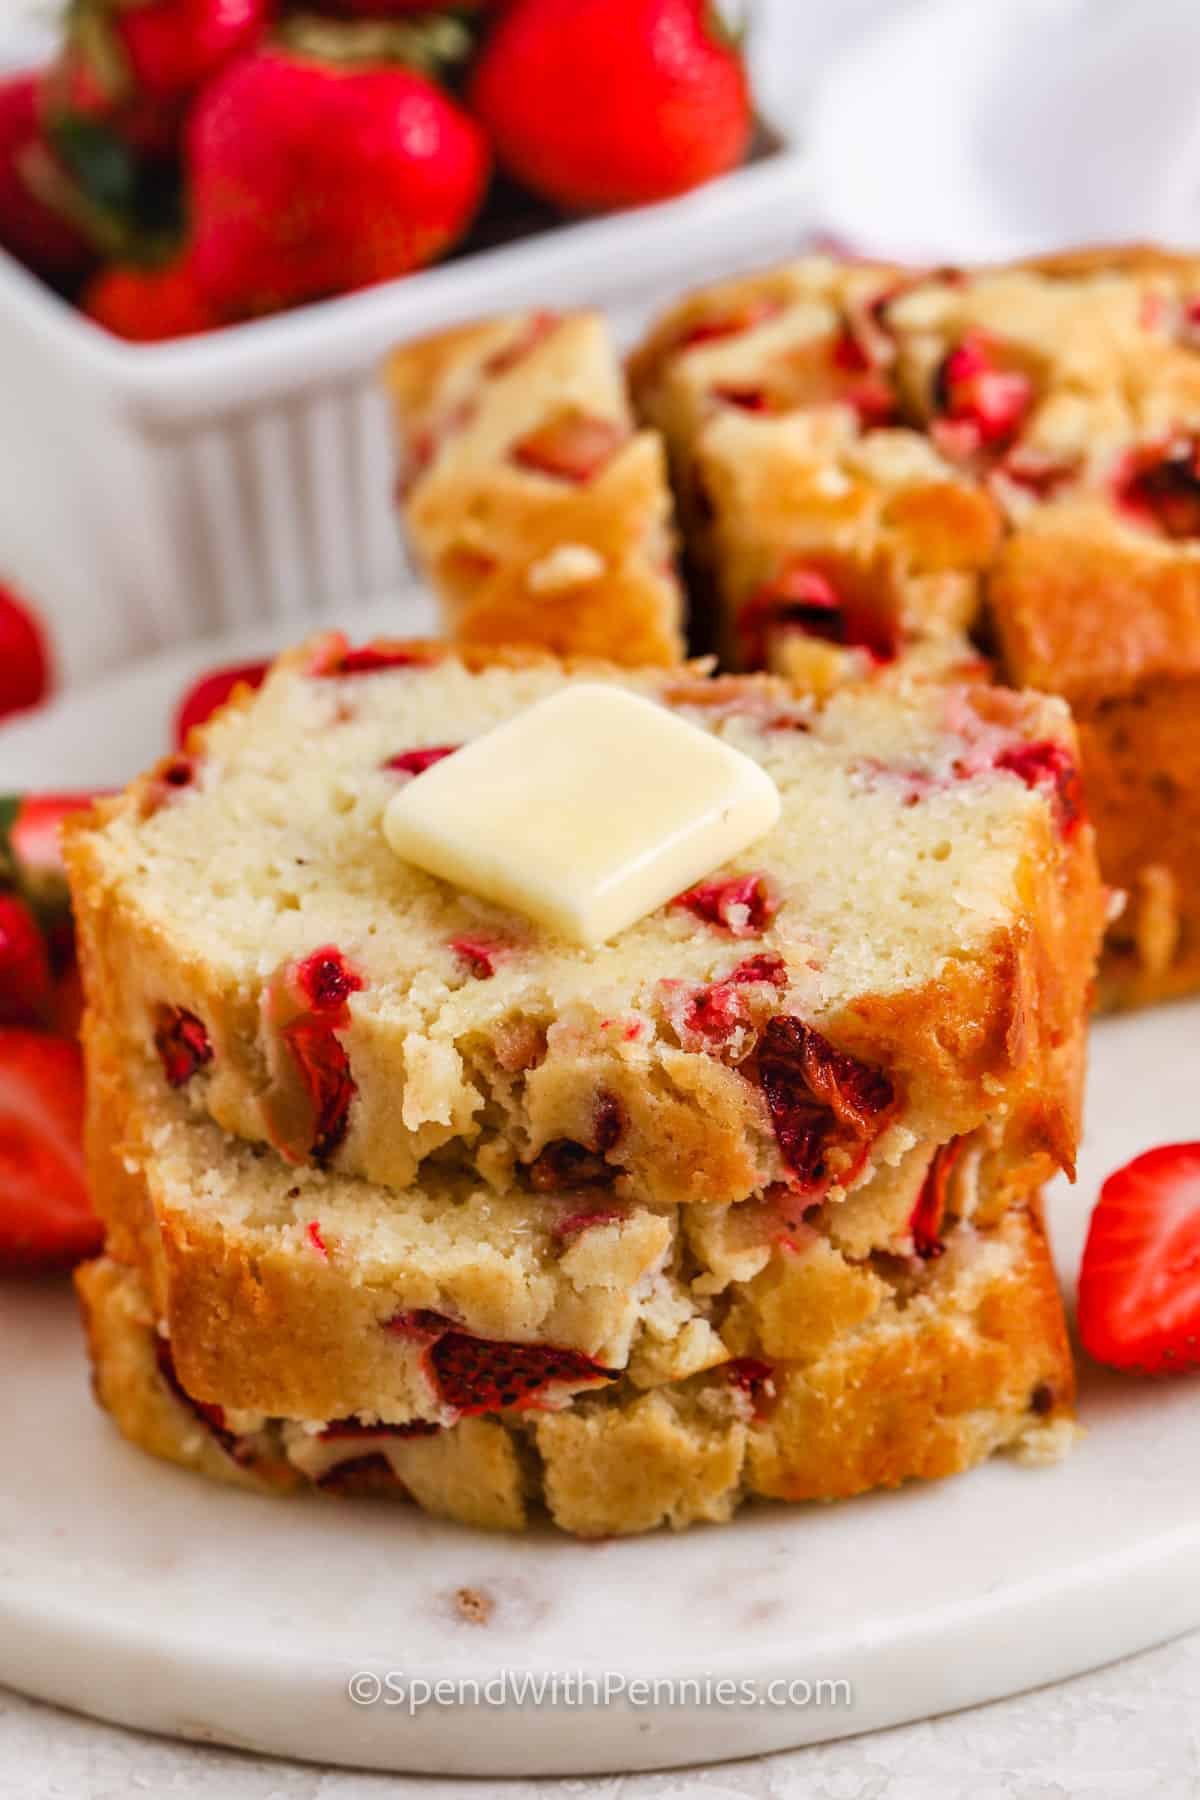 Strawberry Bread cut into slices with butter